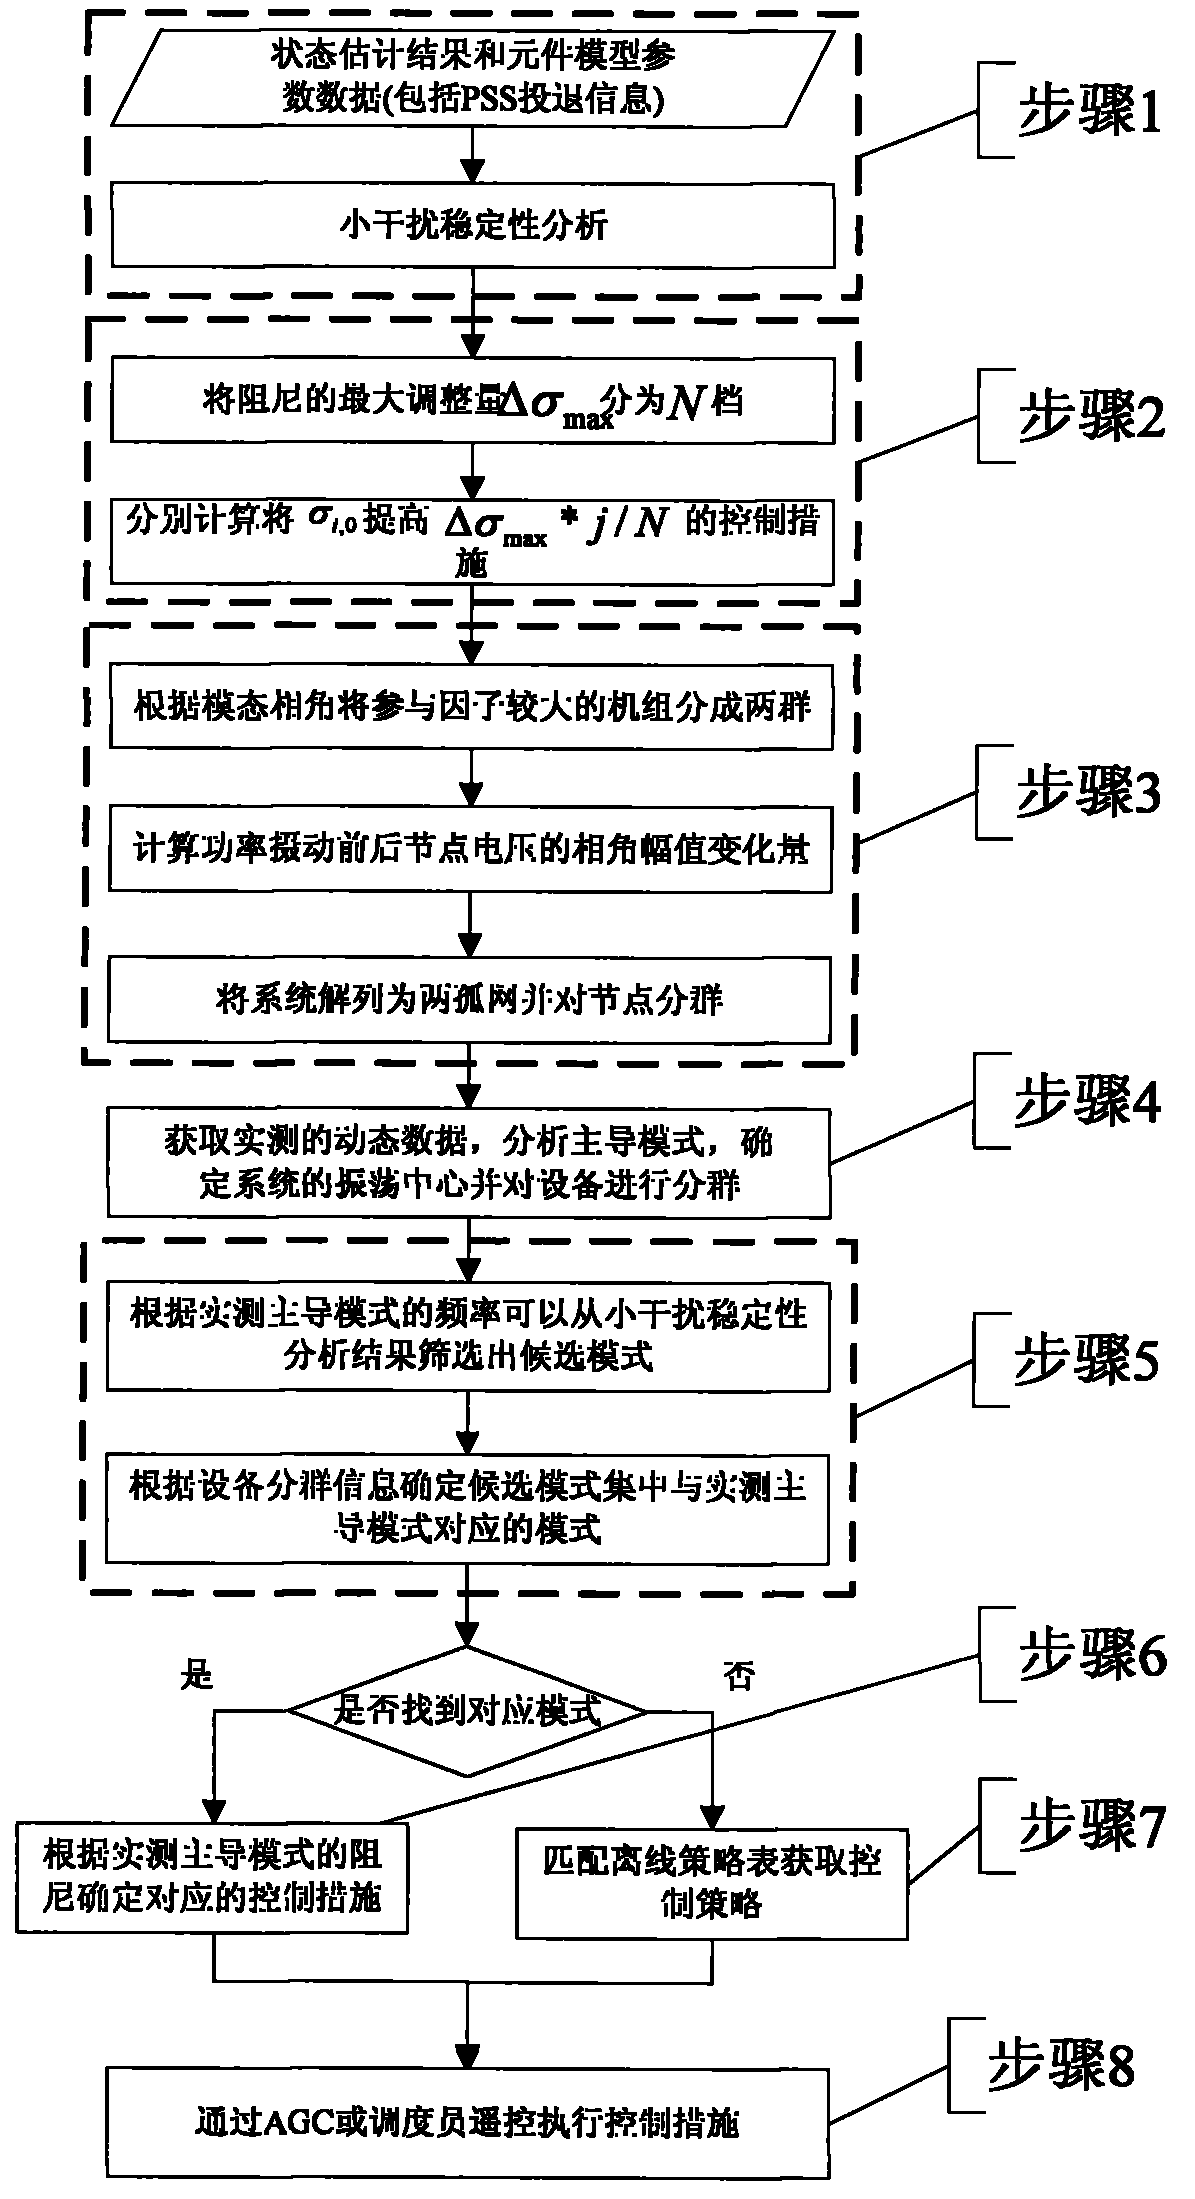 Low-frequency oscillation real-time control method for power system